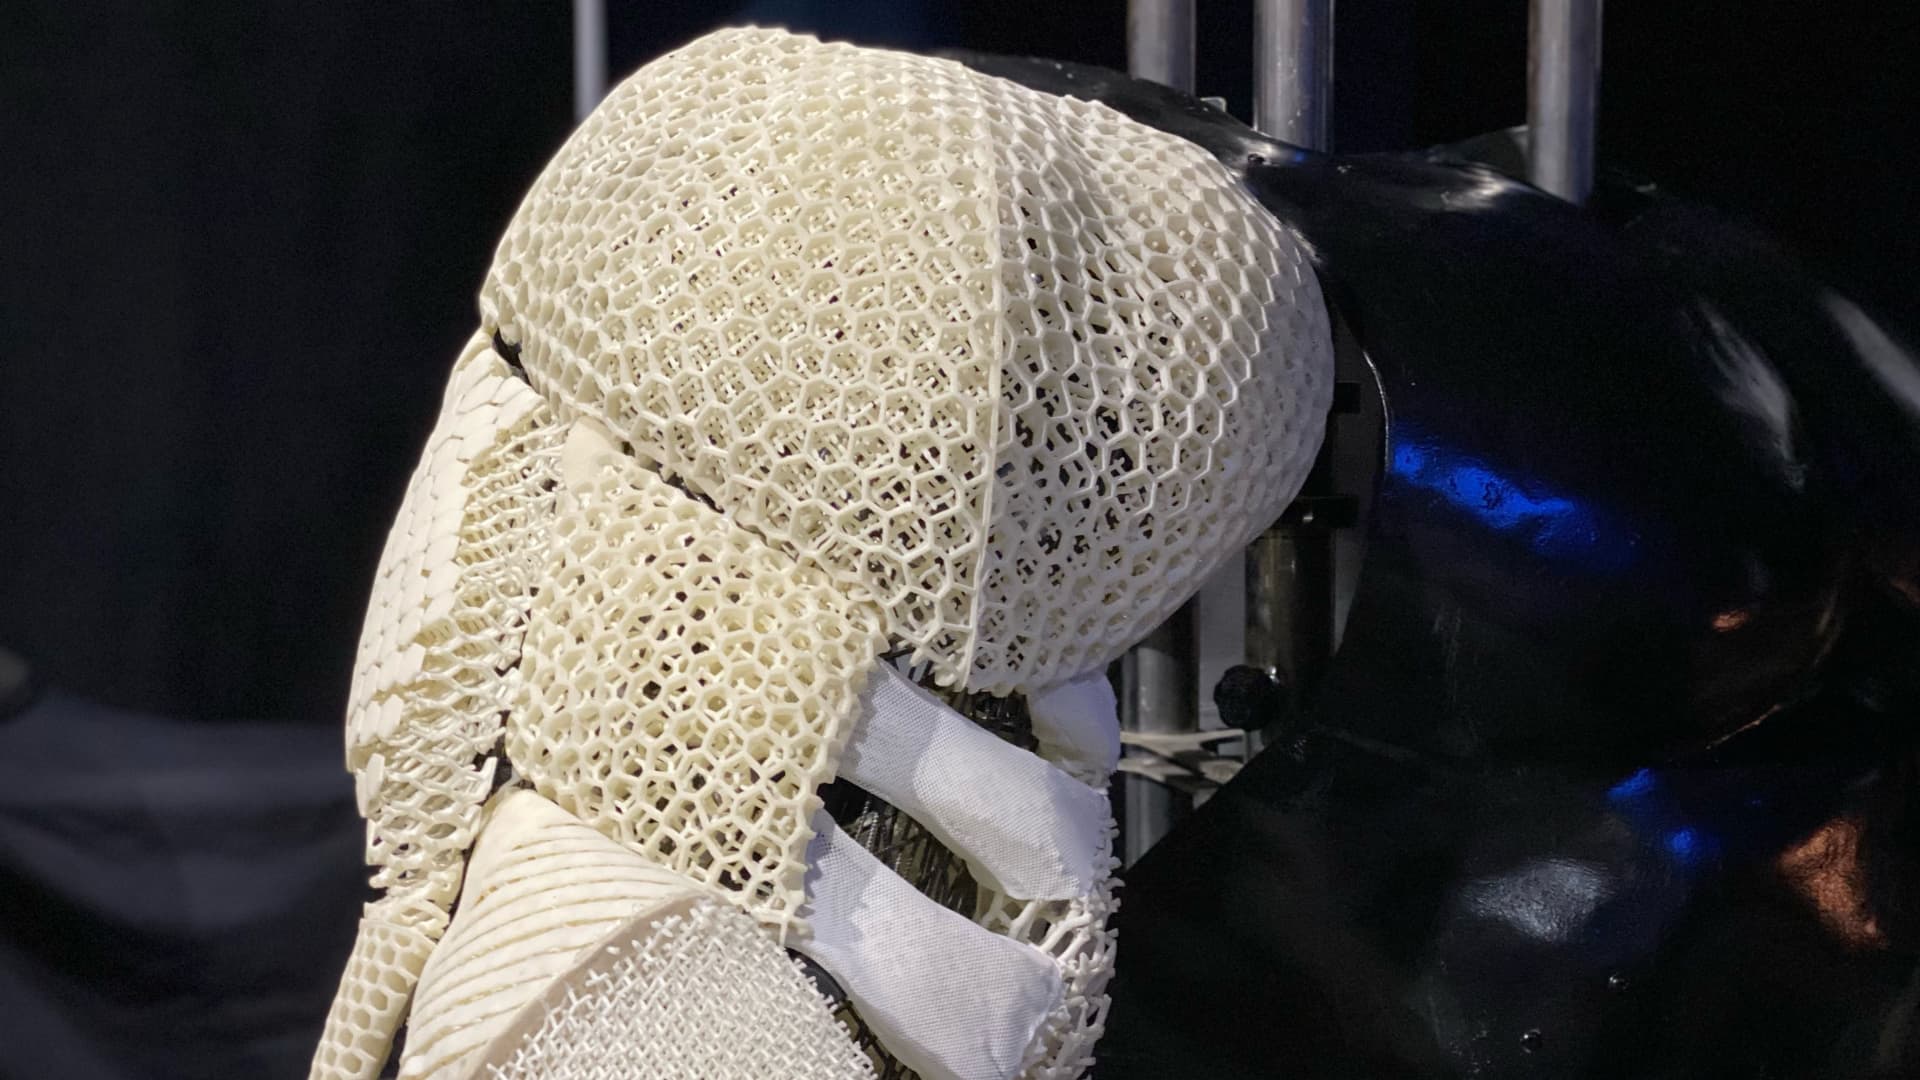 Disney's Imagineering 3D printed muscle for its exoskeleton prototype.